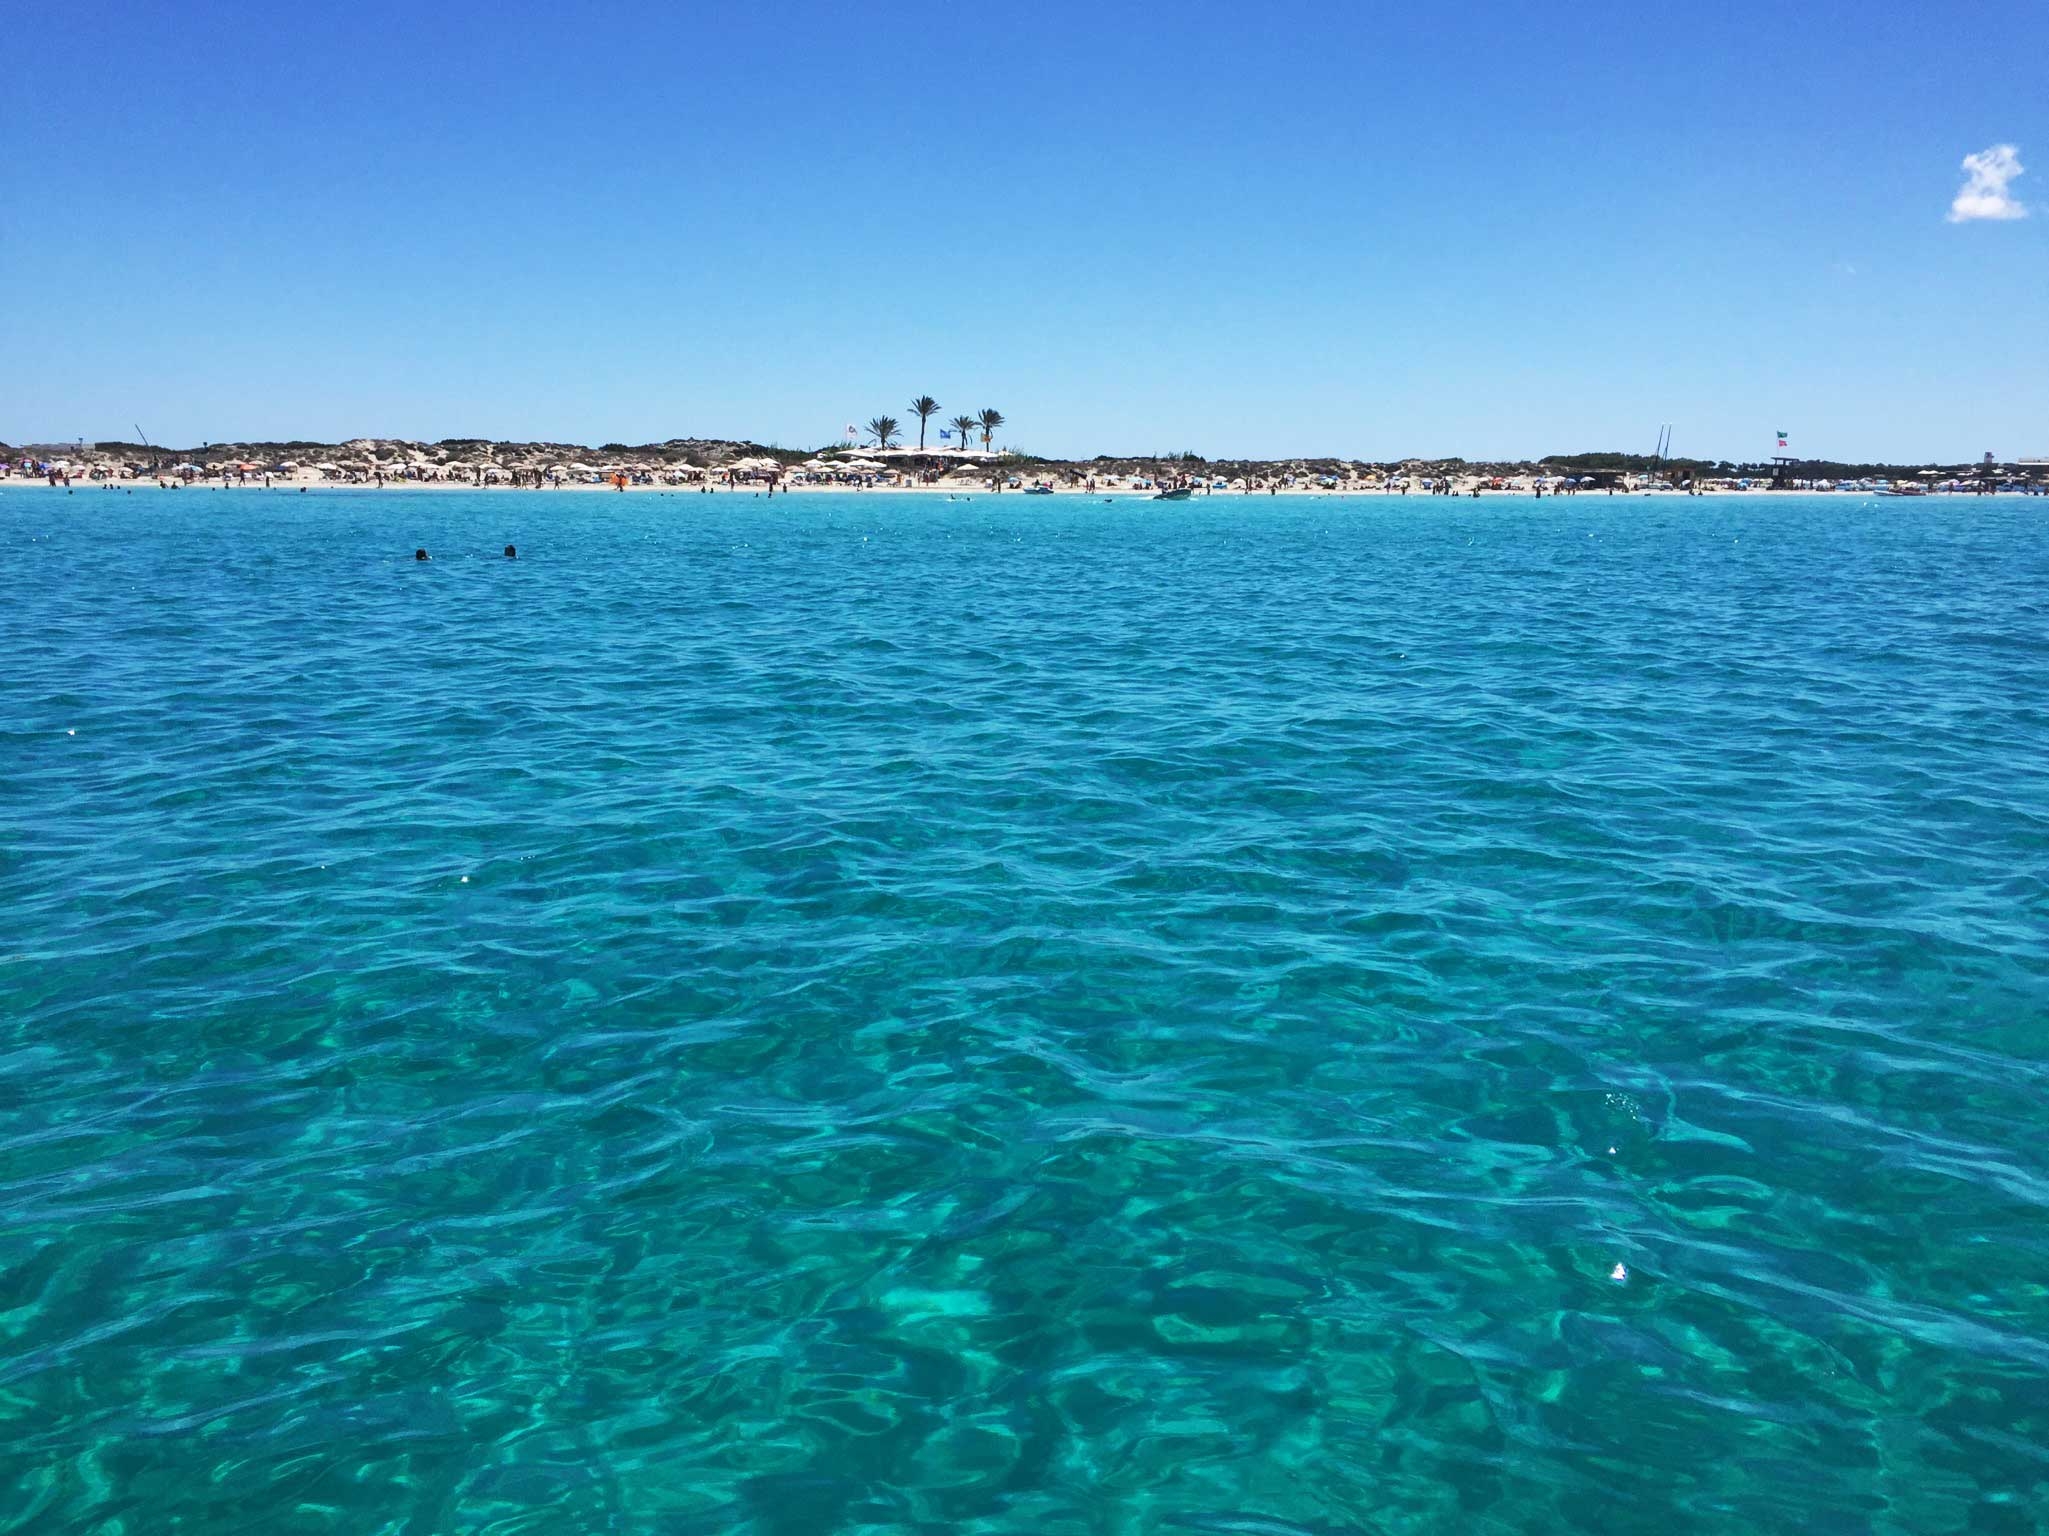 Looking to the Formentera coast from a boat on the bright turquoise ocean 